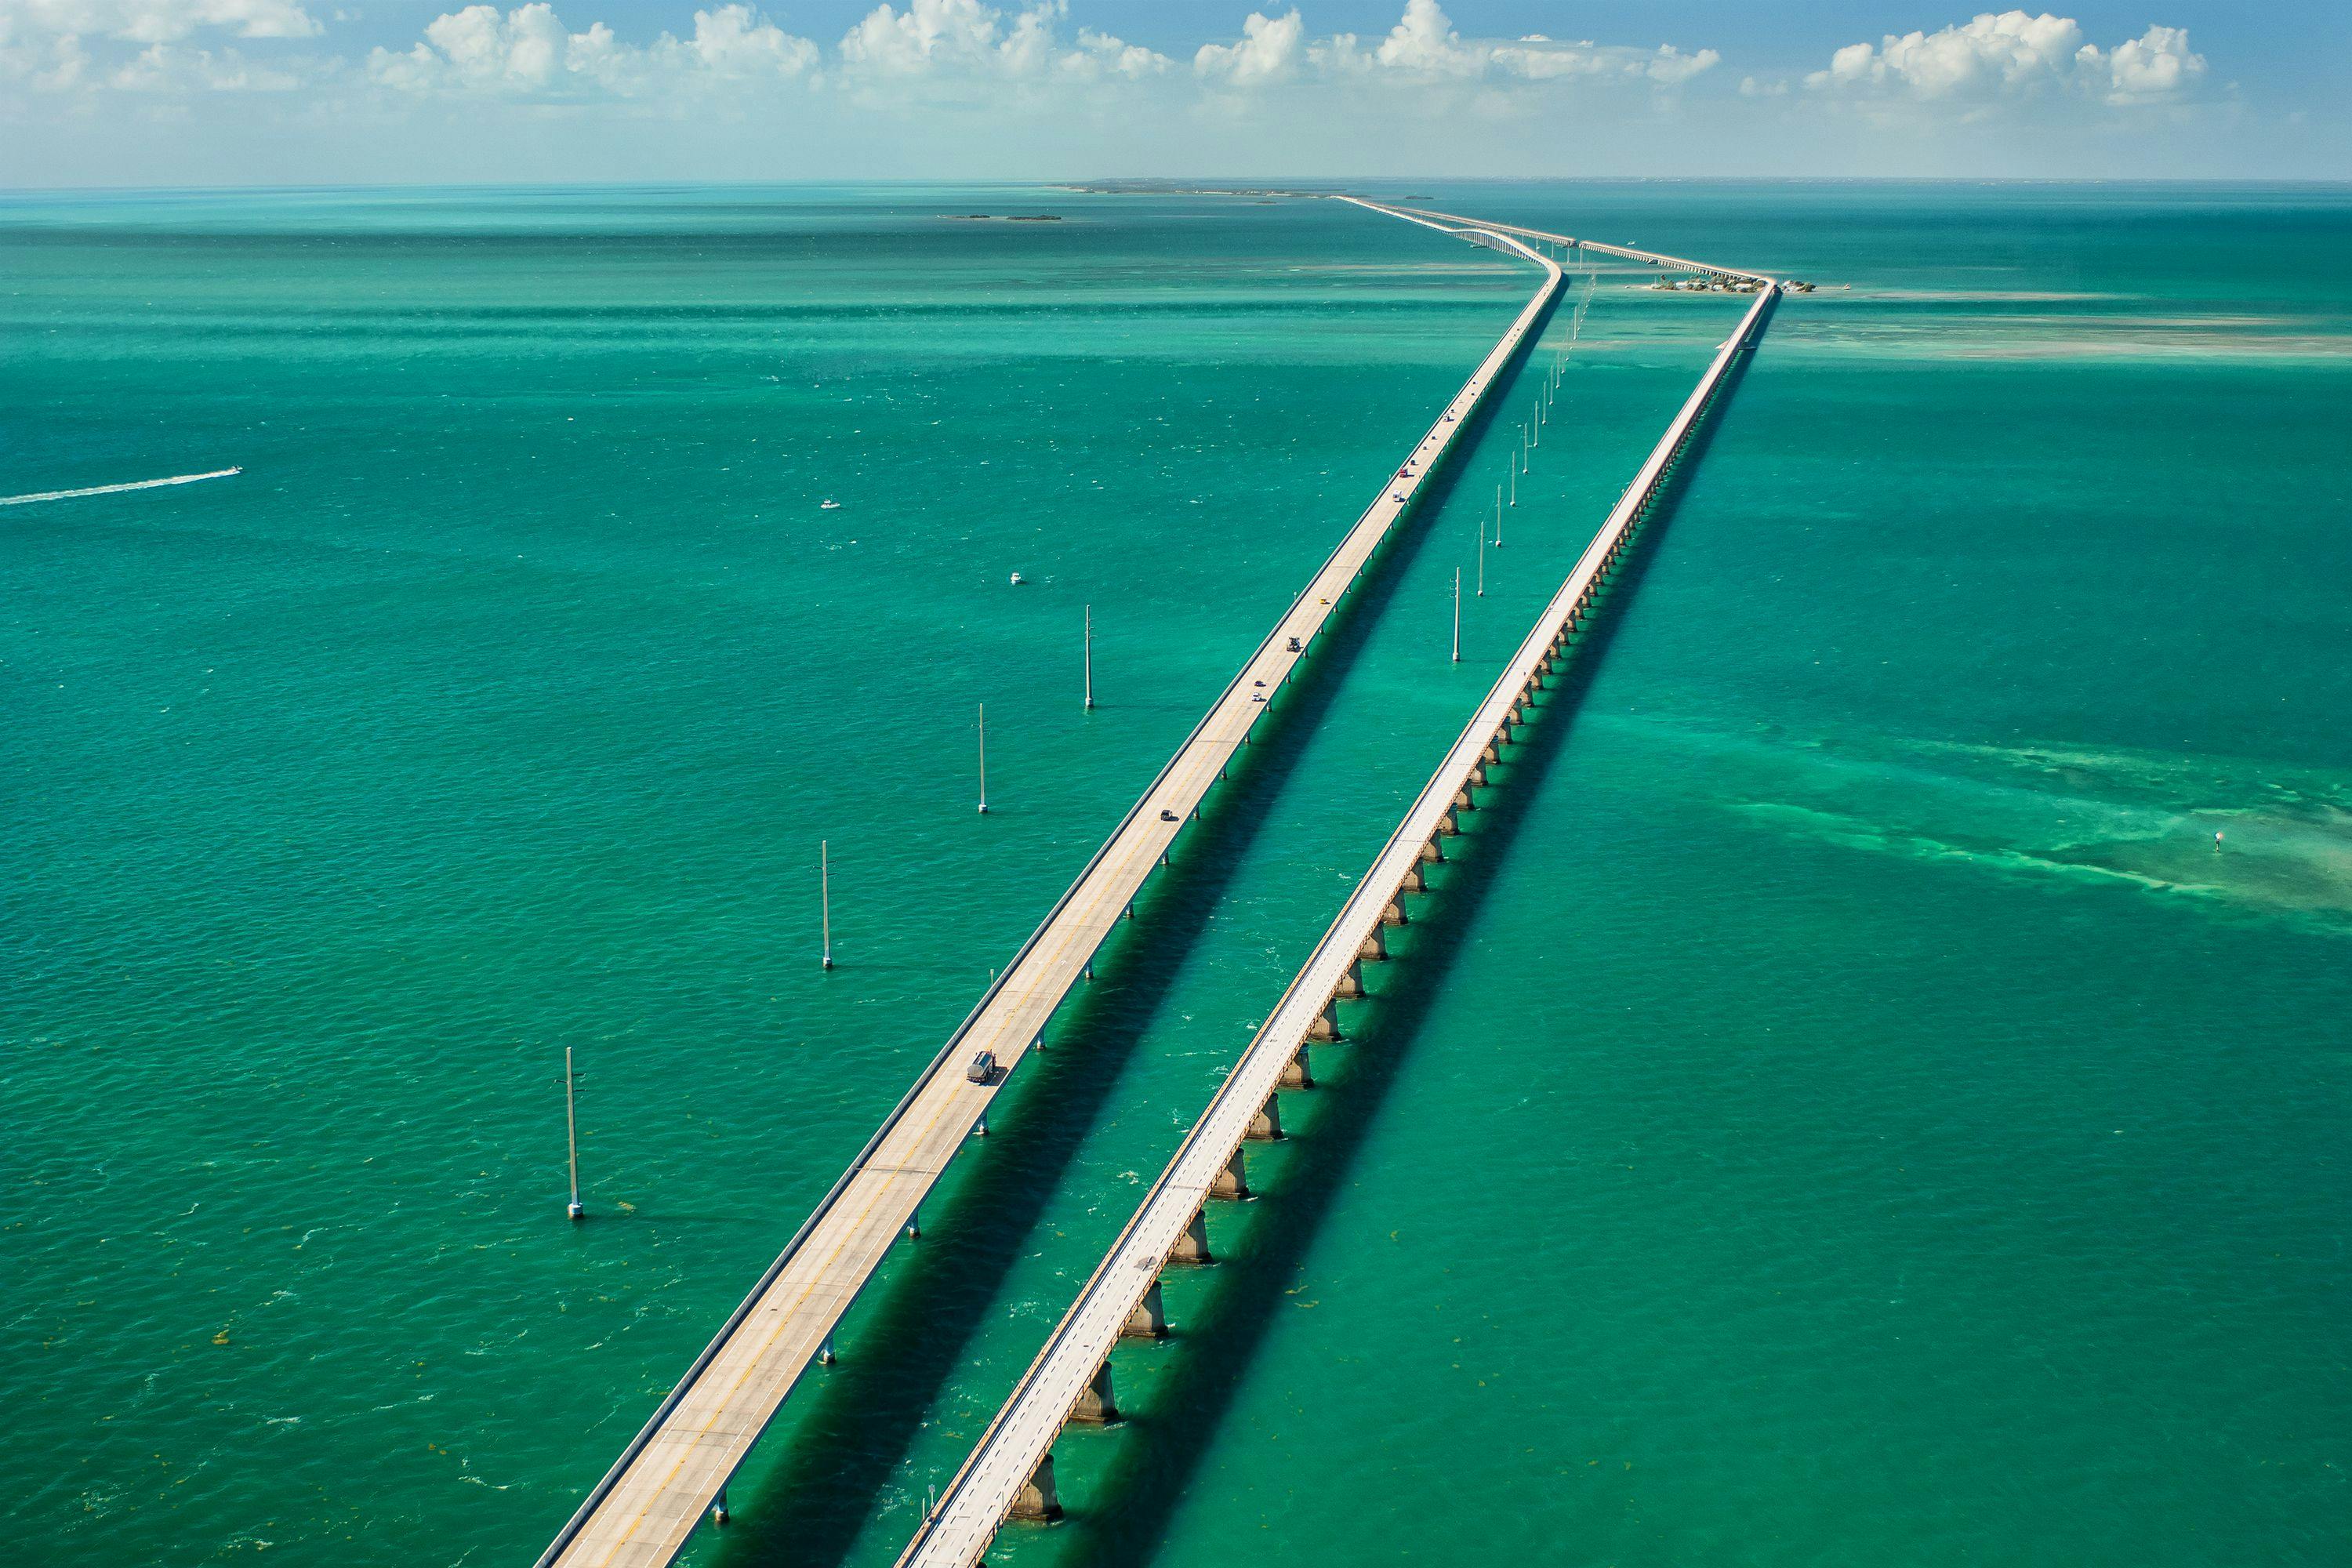 Seven Mile Bridge from the above with the view of water beneath